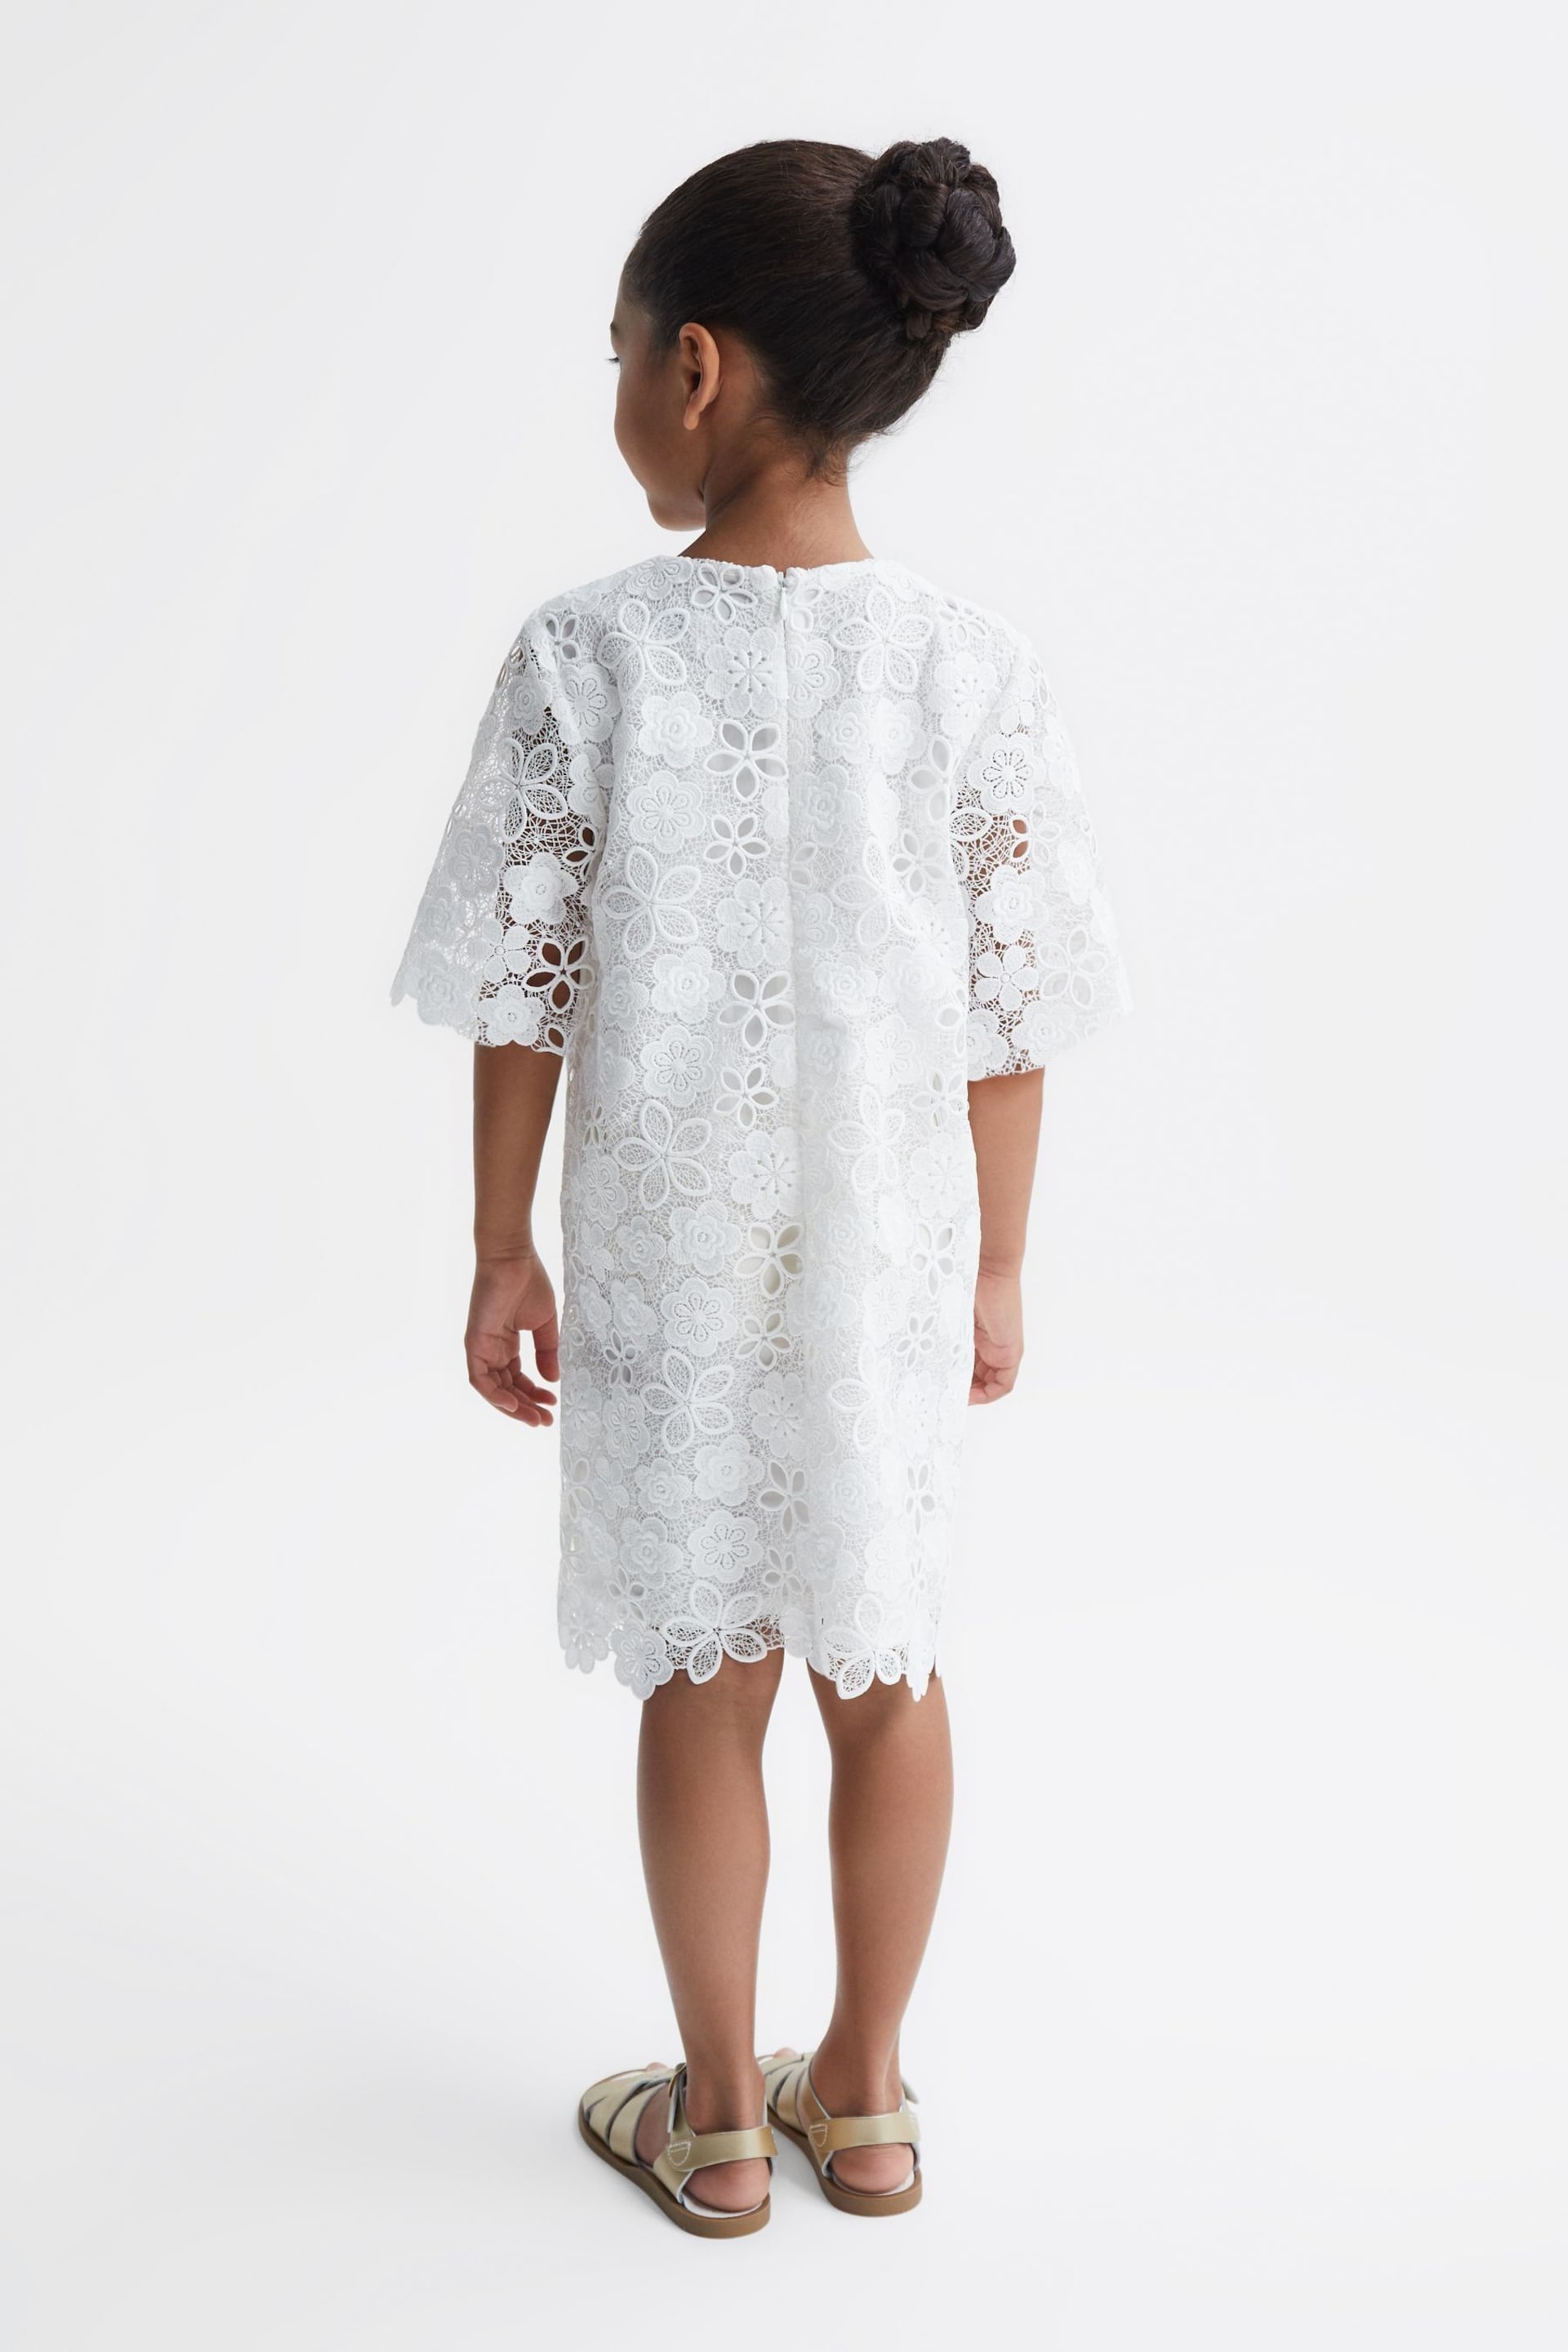 Reiss Ivory Susie Junior Lace T-Shirt Dress - Image 5 of 7